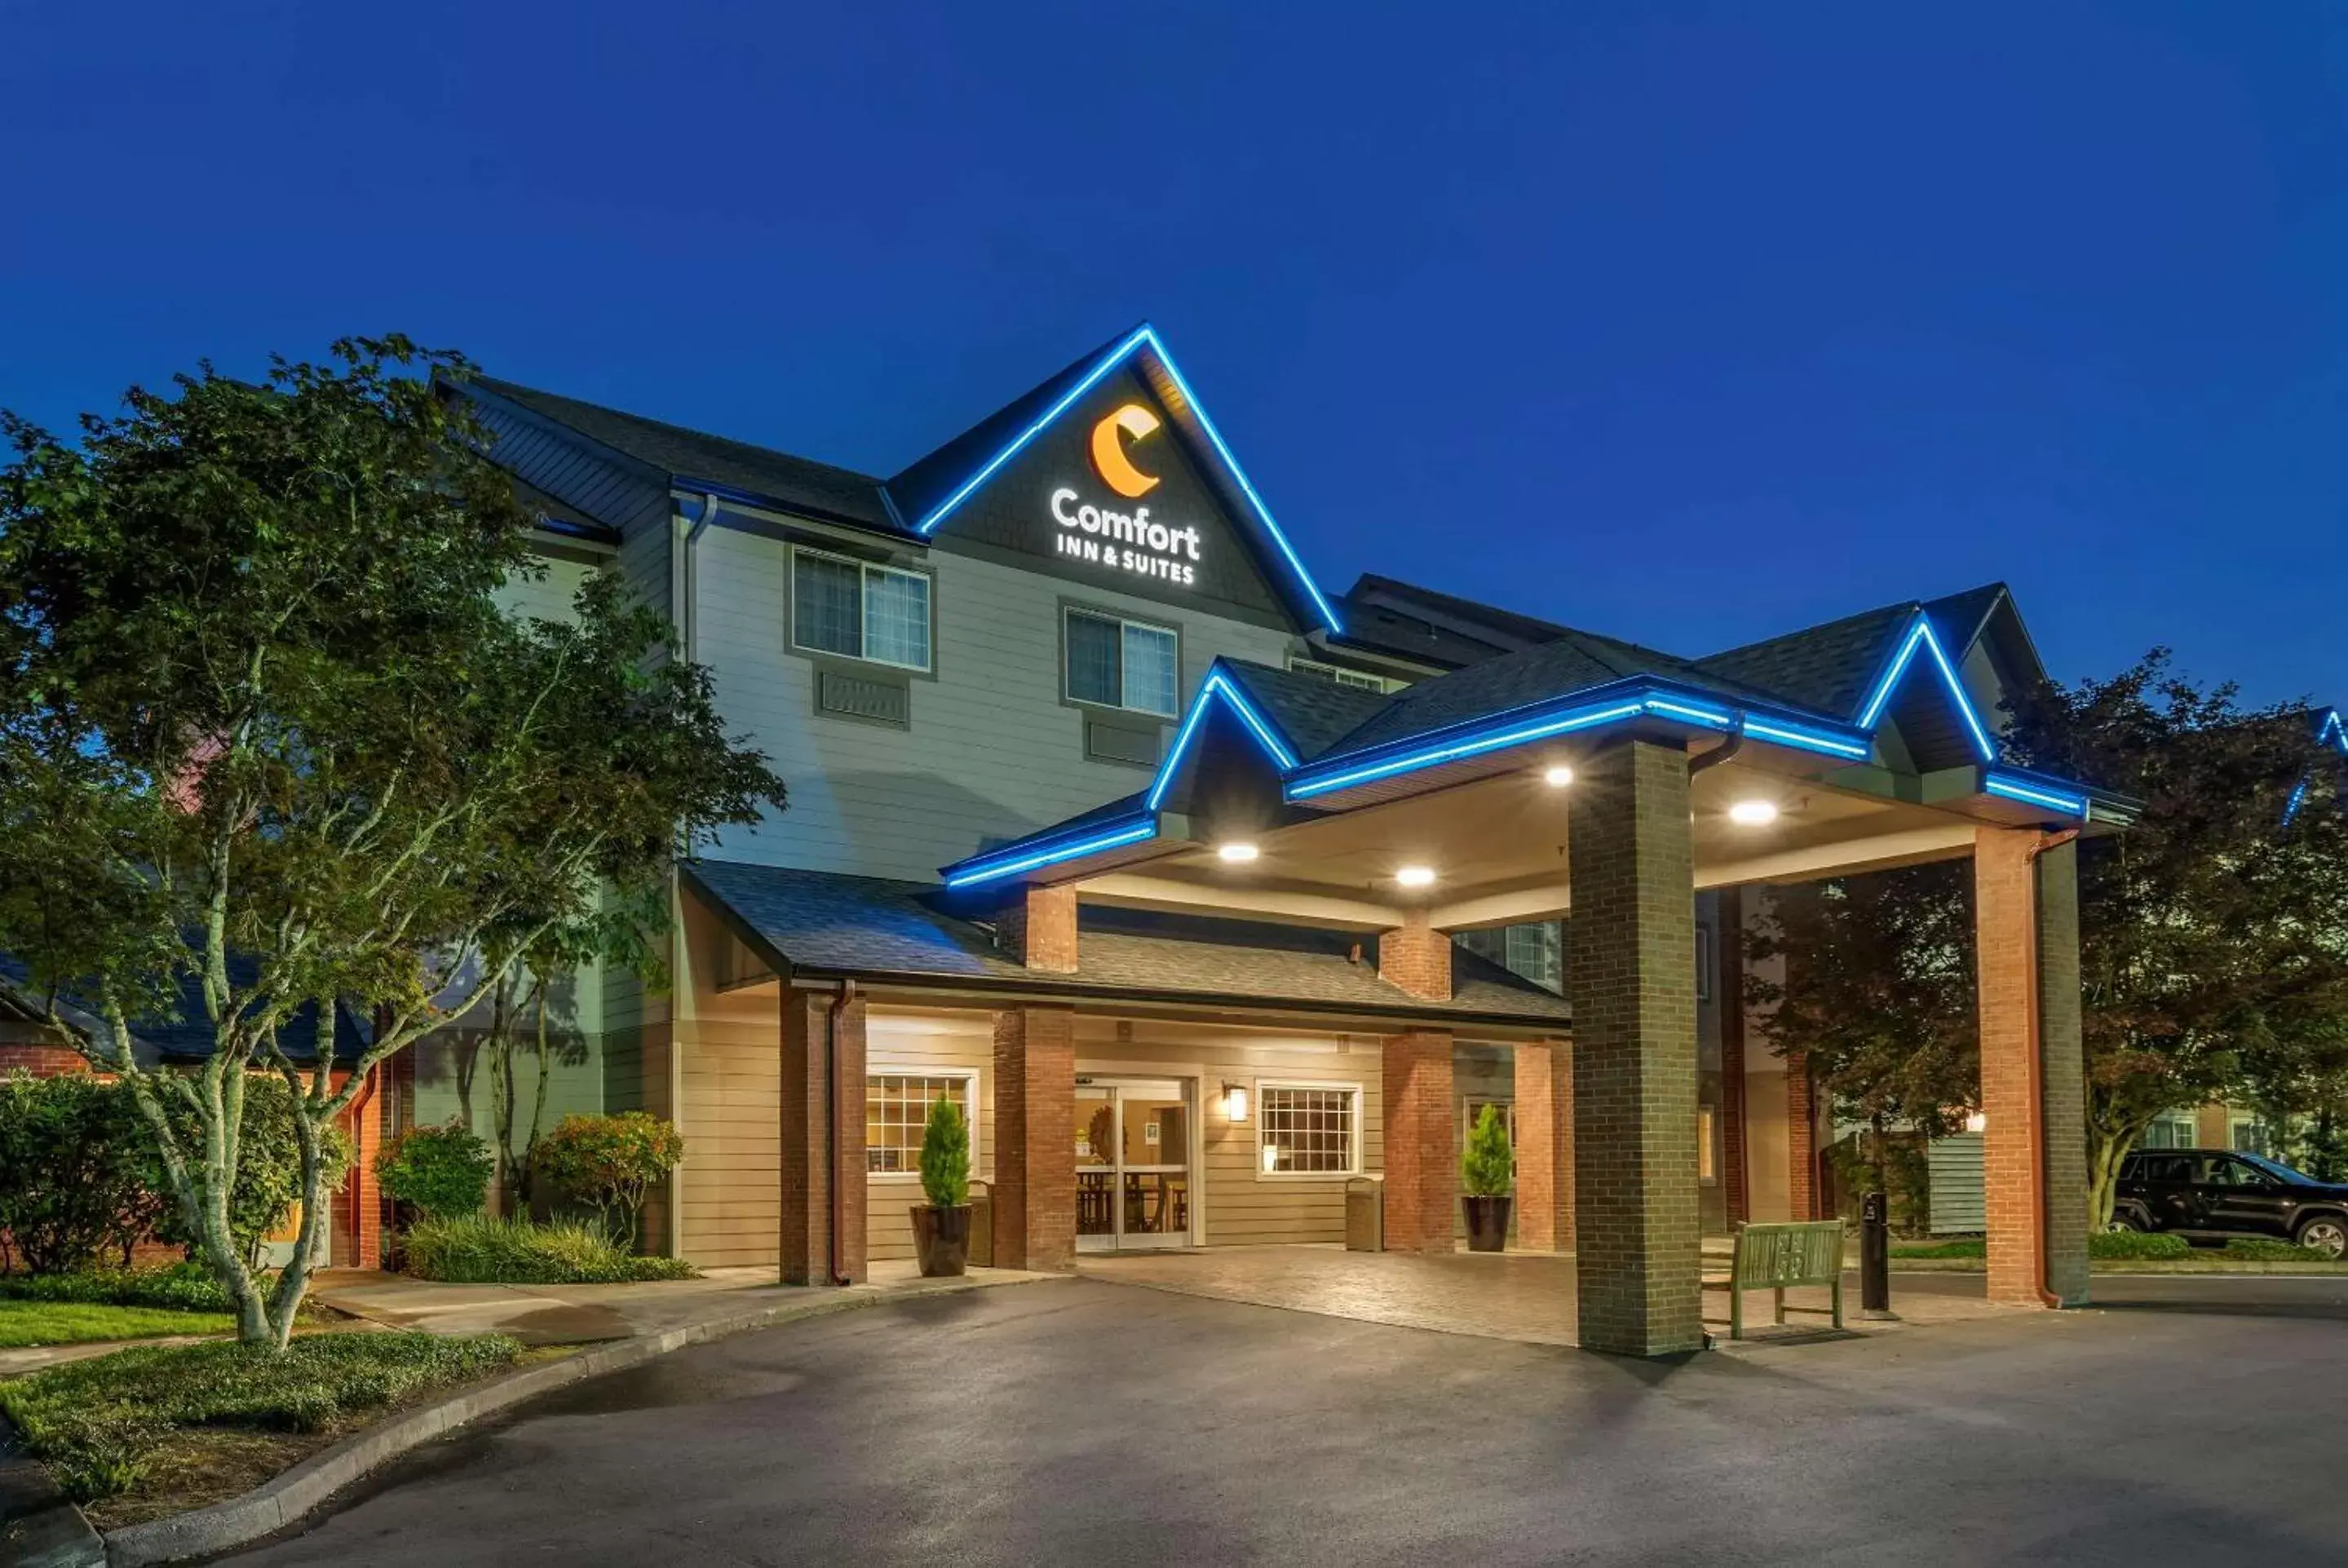 Property Building in Comfort Inn & Suites Tualatin - Lake Oswego South